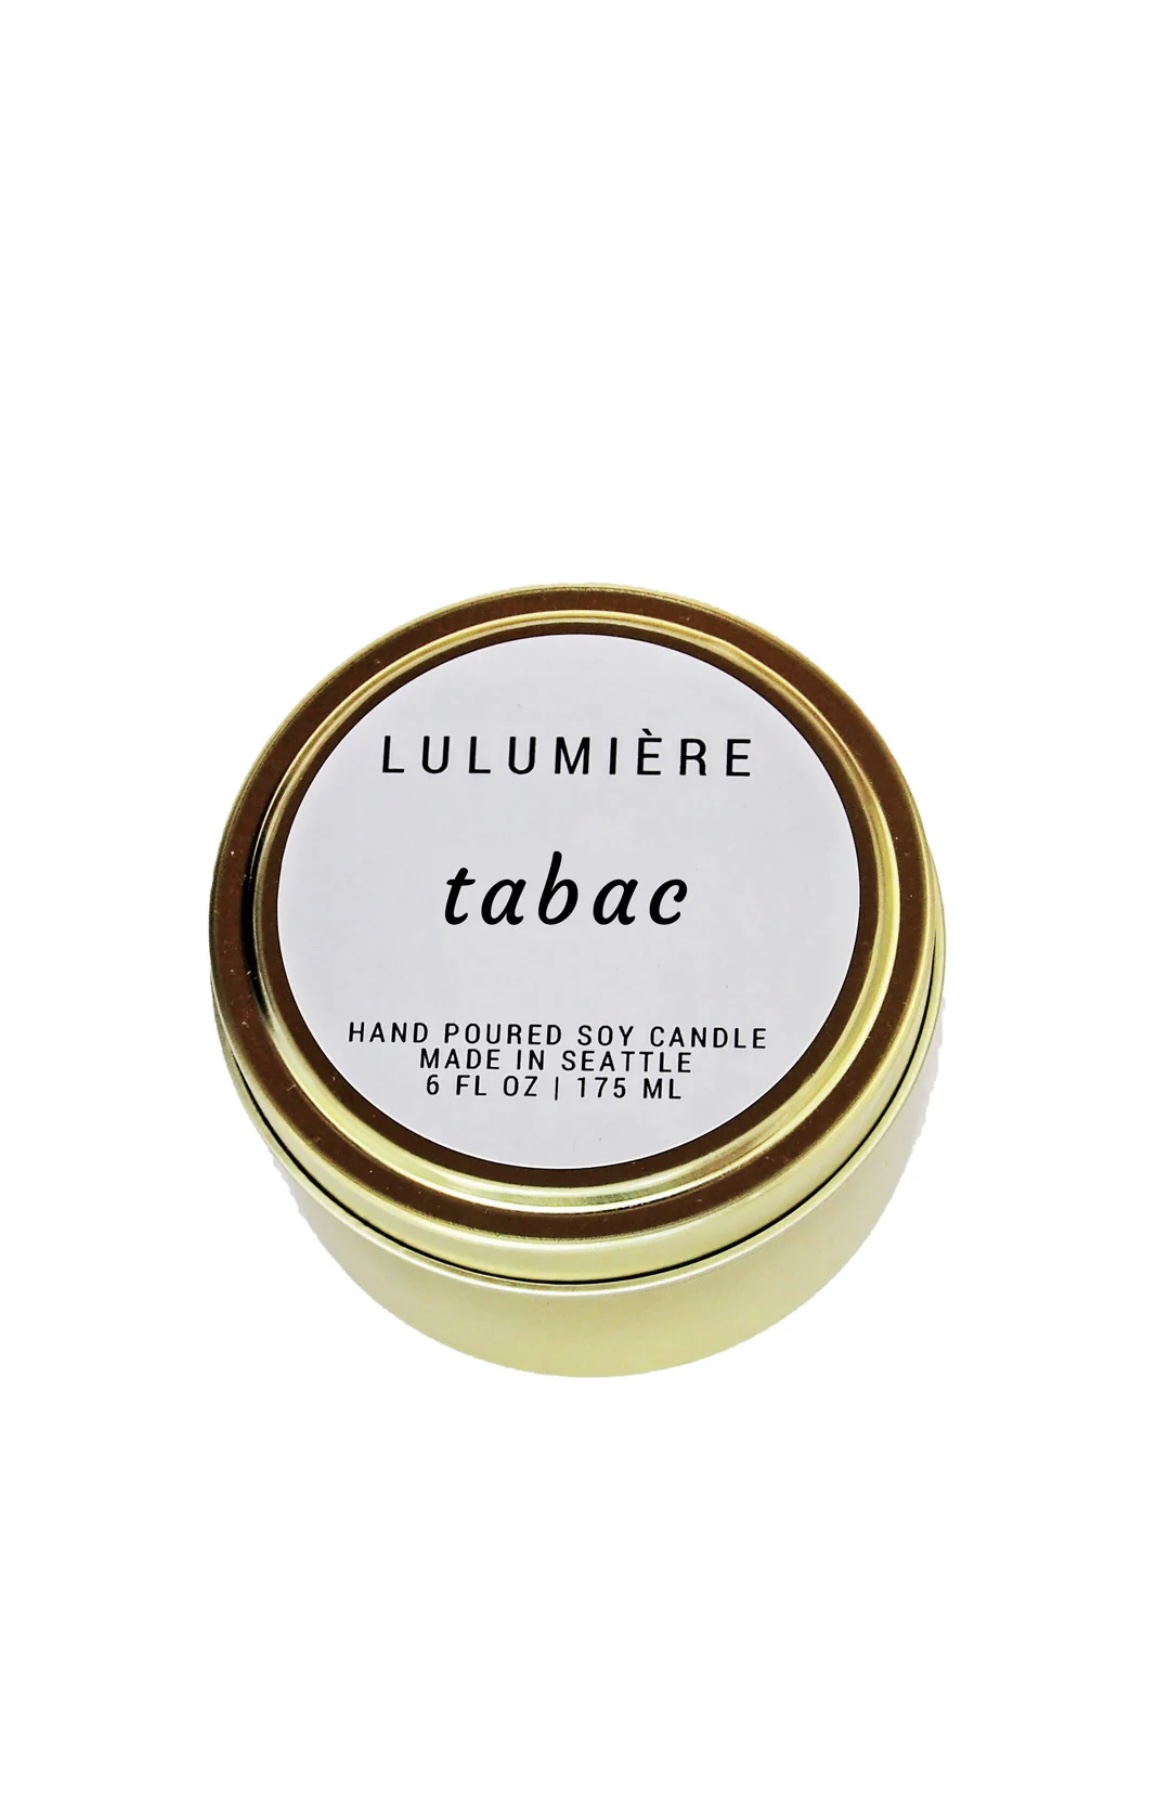 Lulumiere Tabac Soy Candle – ON SALE!